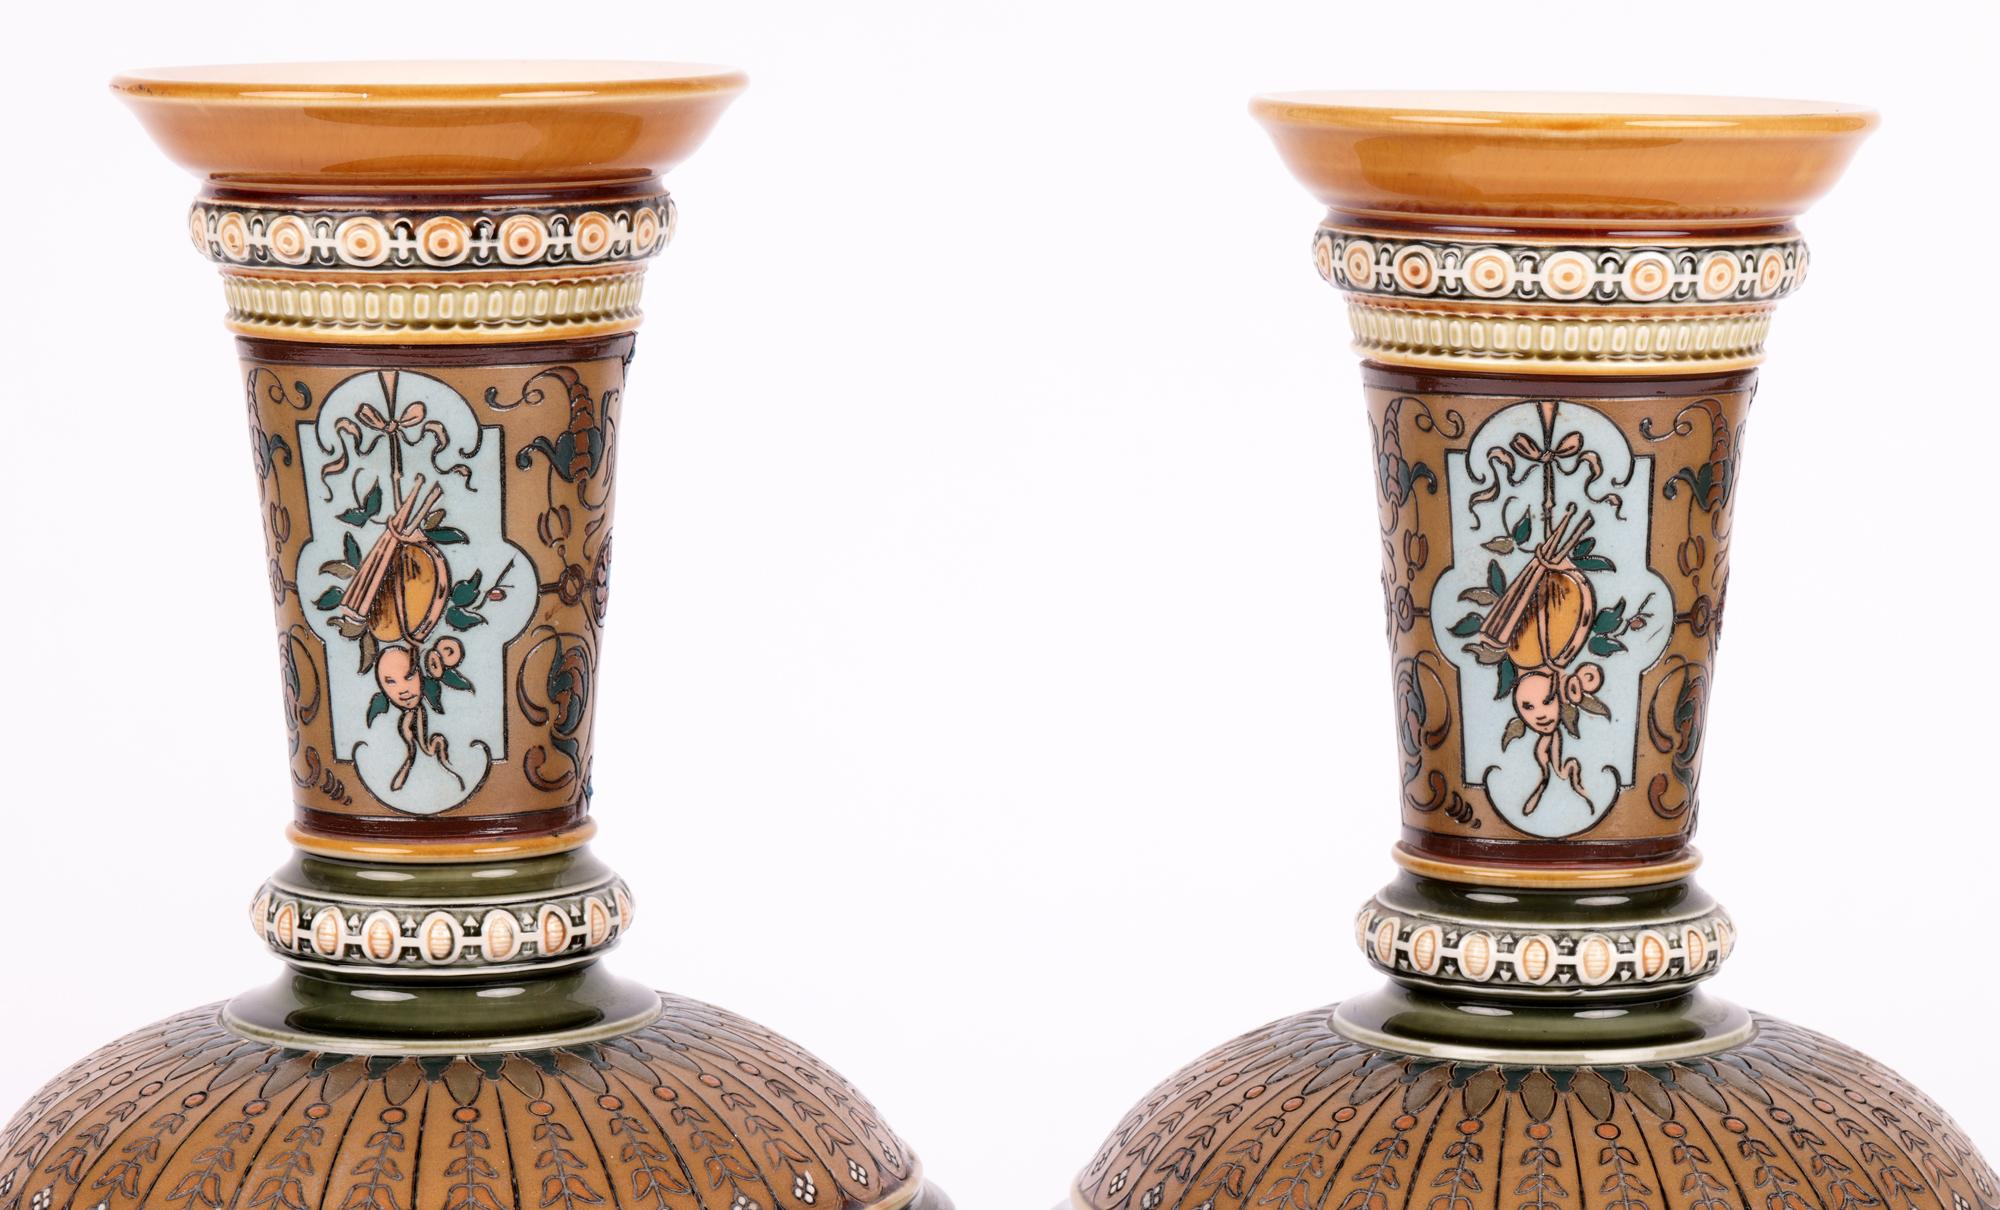 A stunning and large pair German villeroy boch mettlach Art Nouveau pedestal vases decorated with panels containing boys dated 1895. The vases stand raised on a narrow domed round foot with a wide round rouleau shaped body with incised petal designs